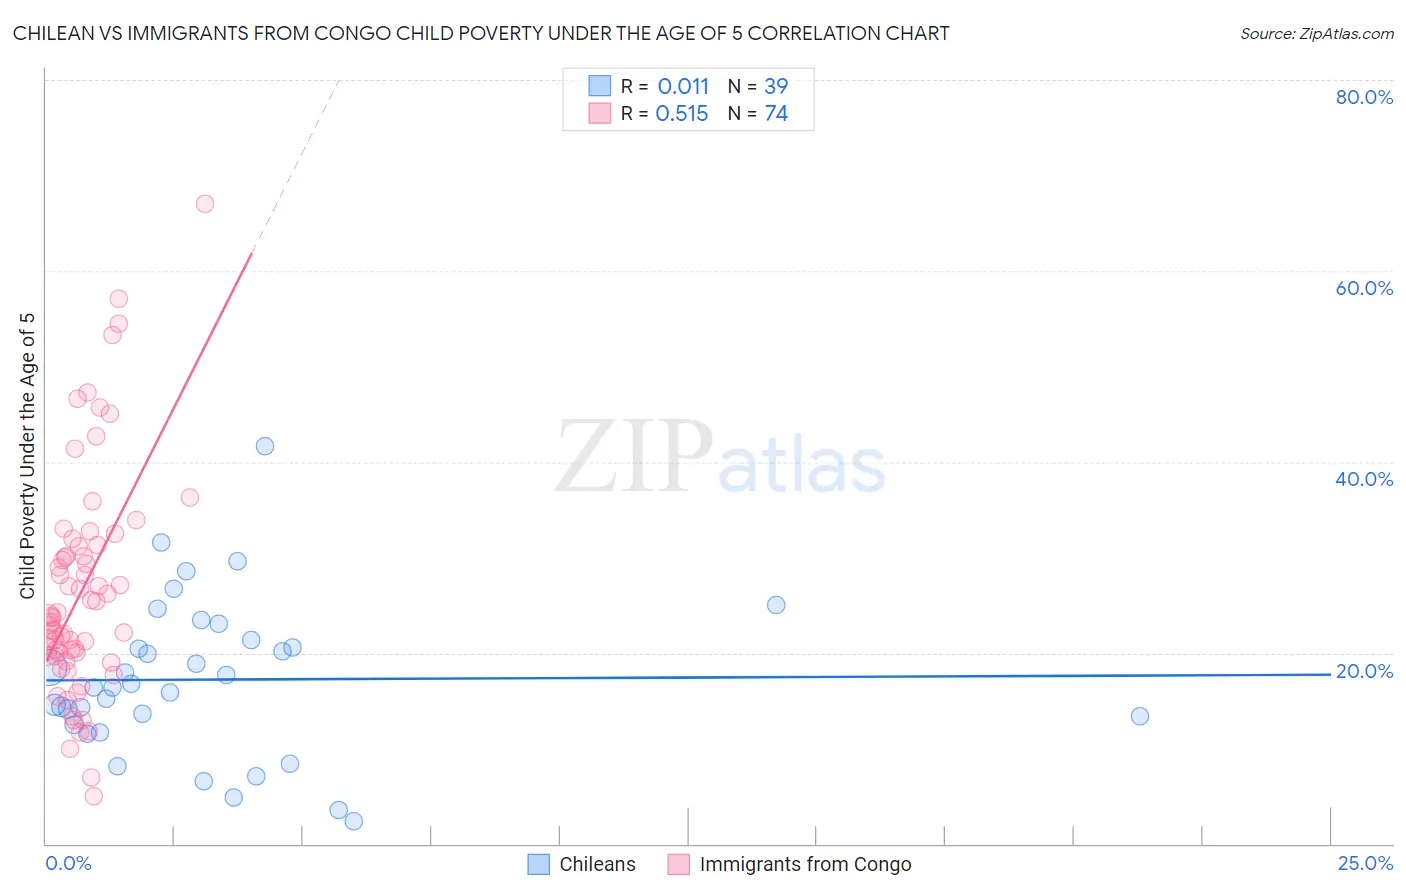 Chilean vs Immigrants from Congo Child Poverty Under the Age of 5